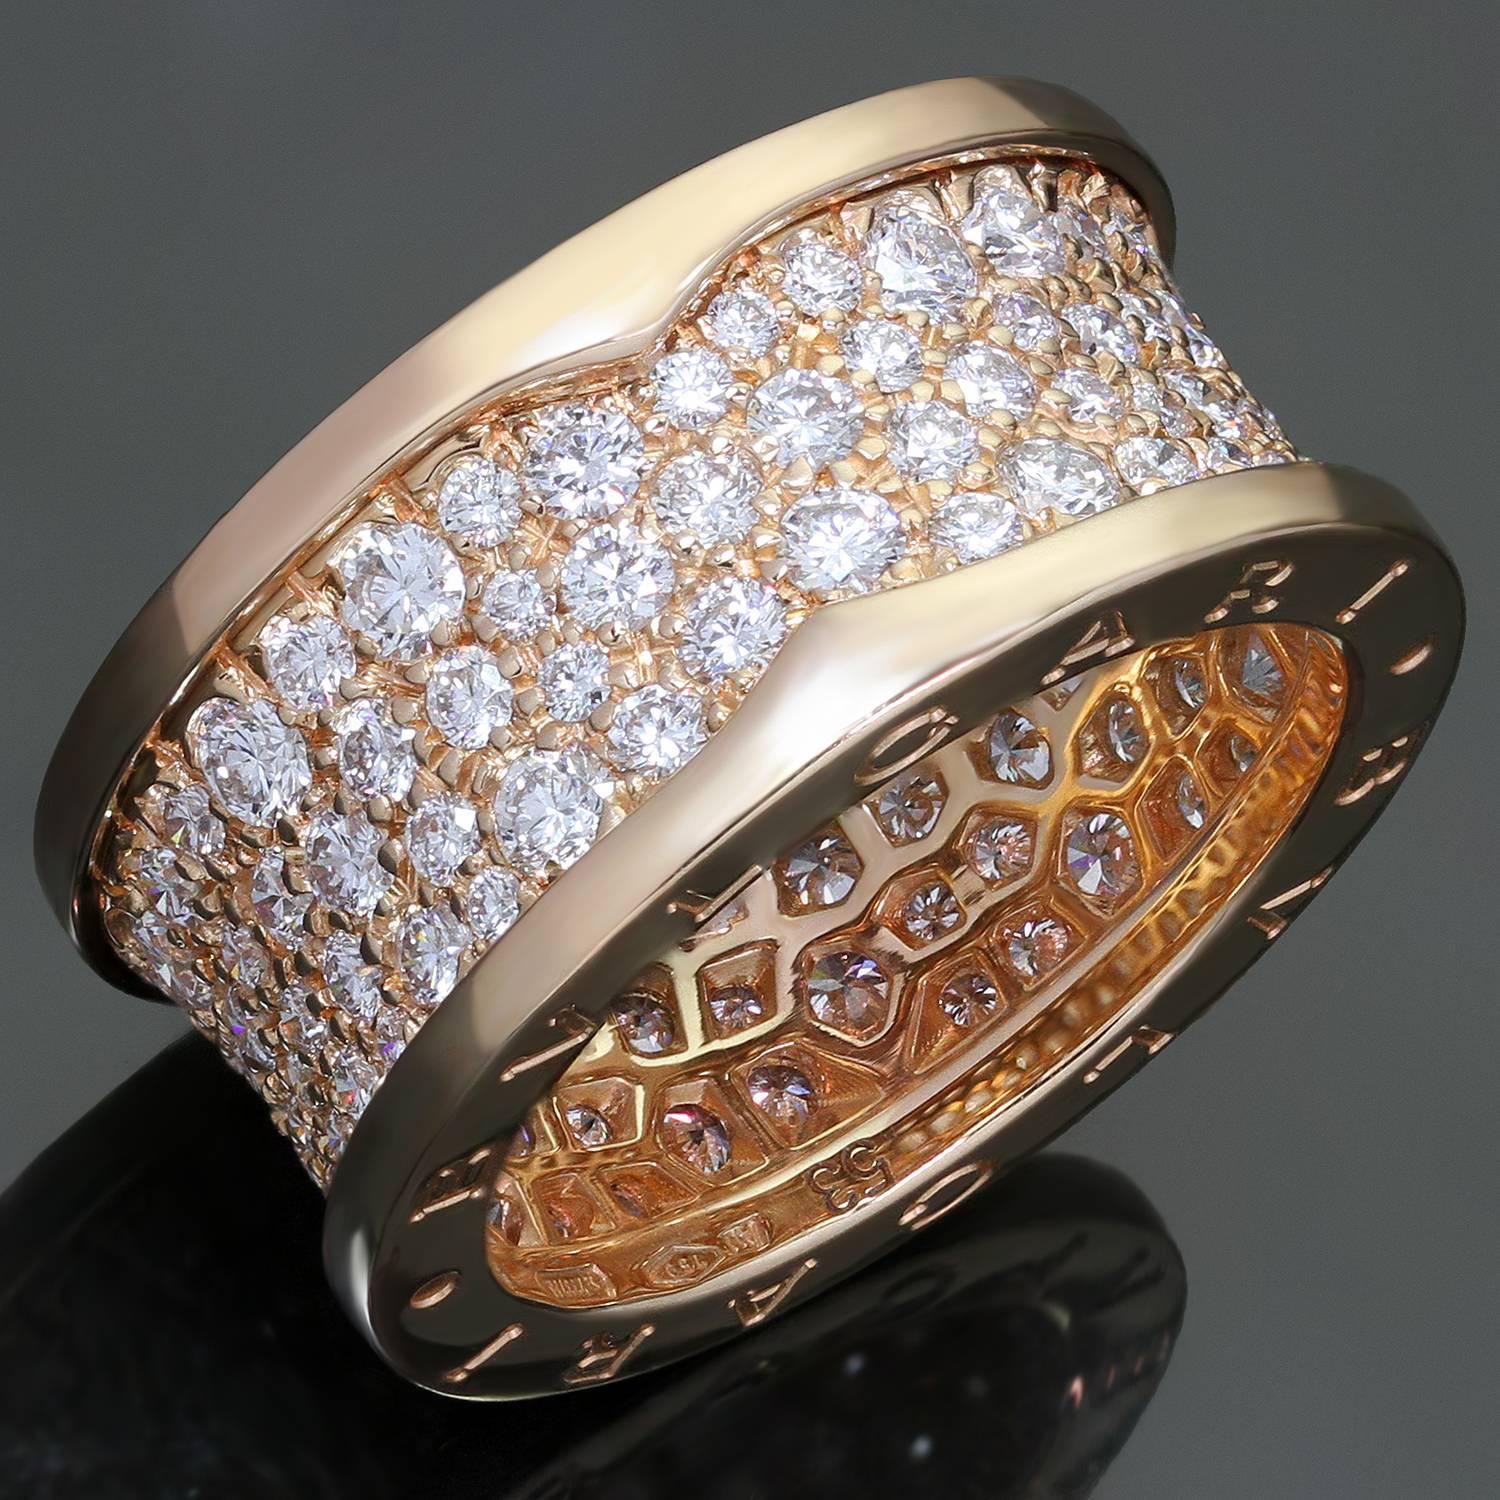 This fabulous ring from Bulgari's iconic B.zero1 collection features a single band design crafted in 18k rose gold, engraved with the Bvlgari logo on both sides and pave-set with sparkling brilliant-cut round diamonds of an estimated 2.80 carats.